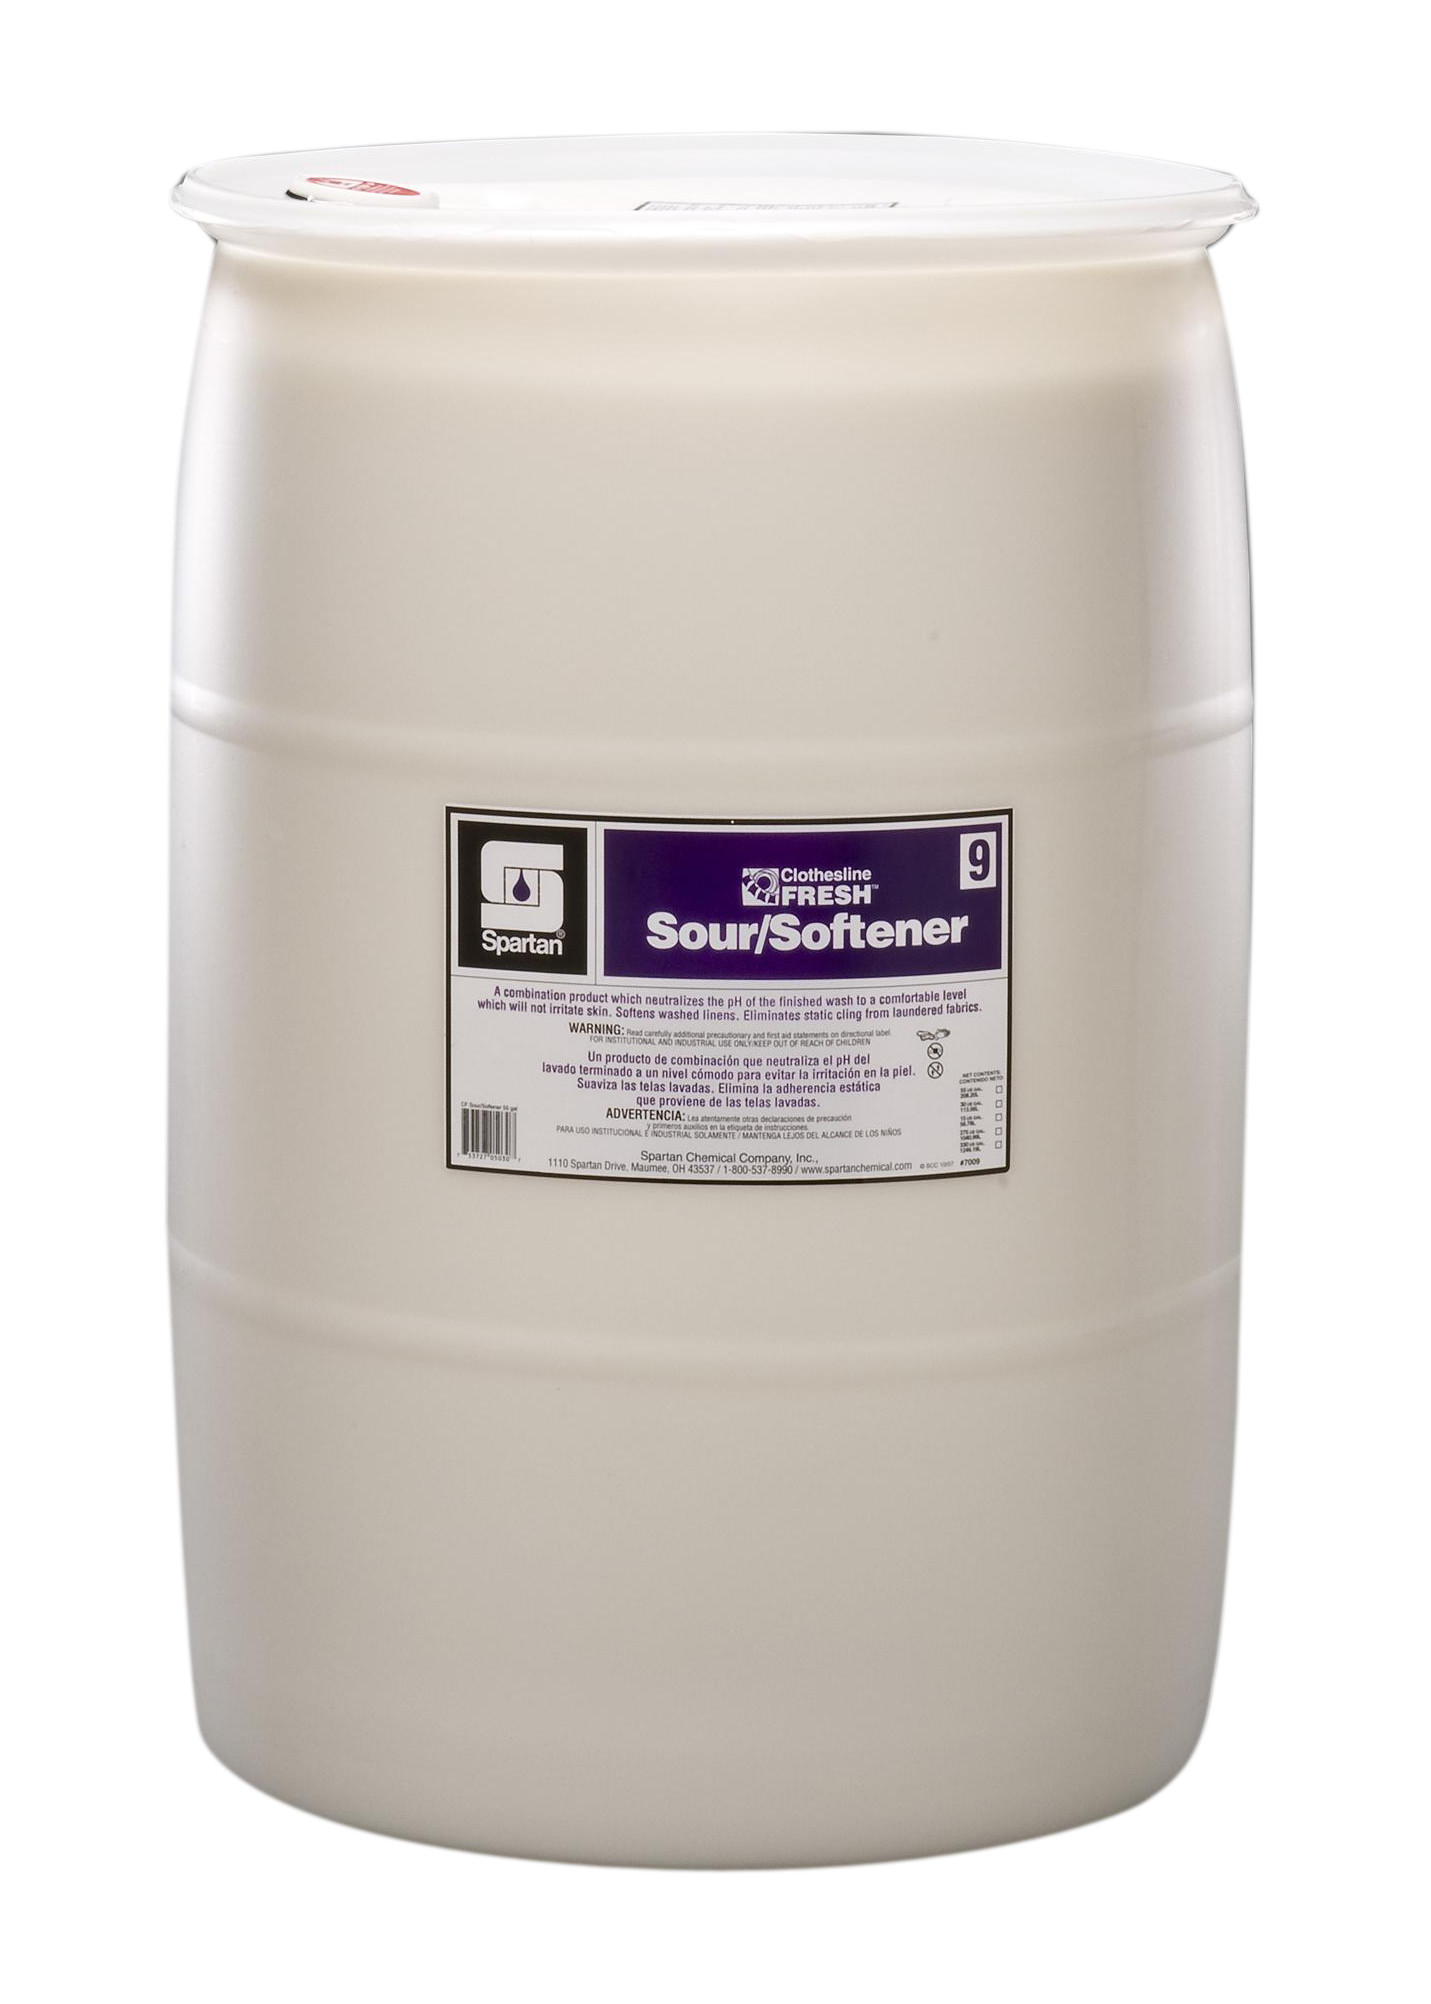 Spartan Chemical Company Clothesline Fresh Sour/Softener 9, 55 GAL DRUM